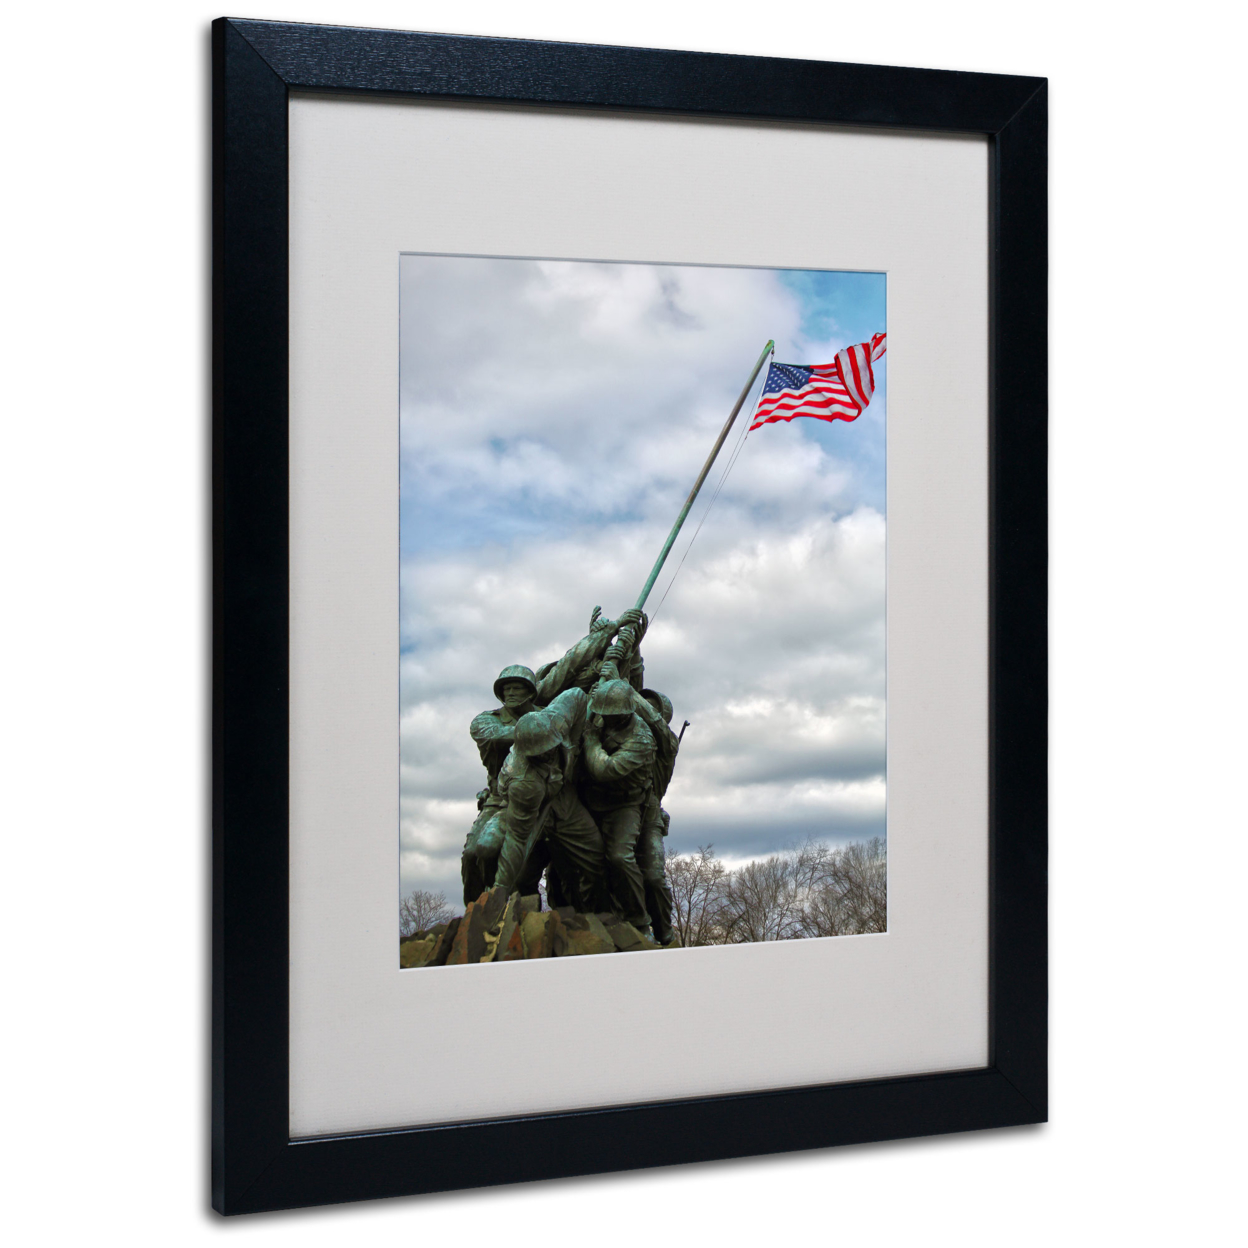 CATeyes 'Marine Corps Memorial 2' Black Wooden Framed Art 18 X 22 Inches